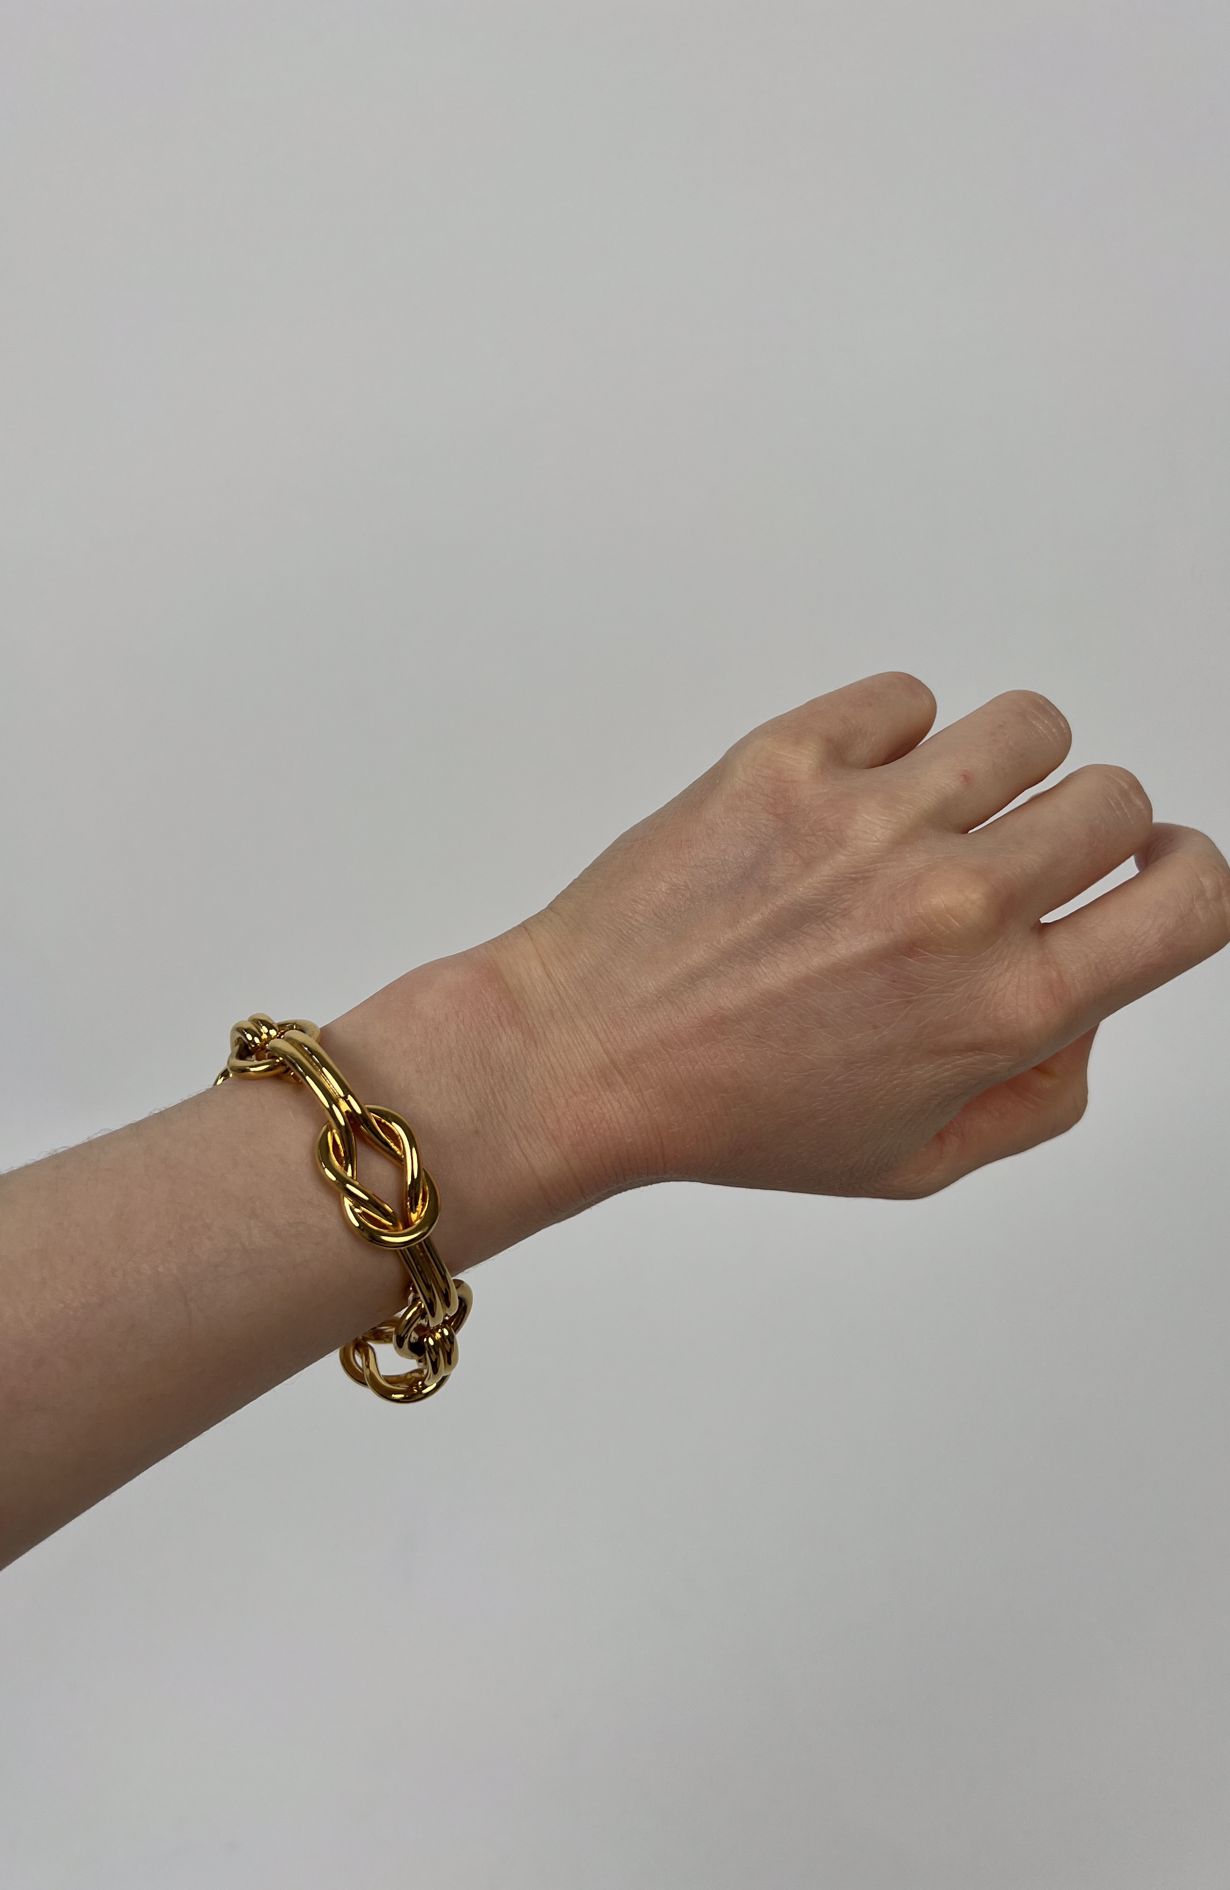 Gucci bracelet goldplated from 1991